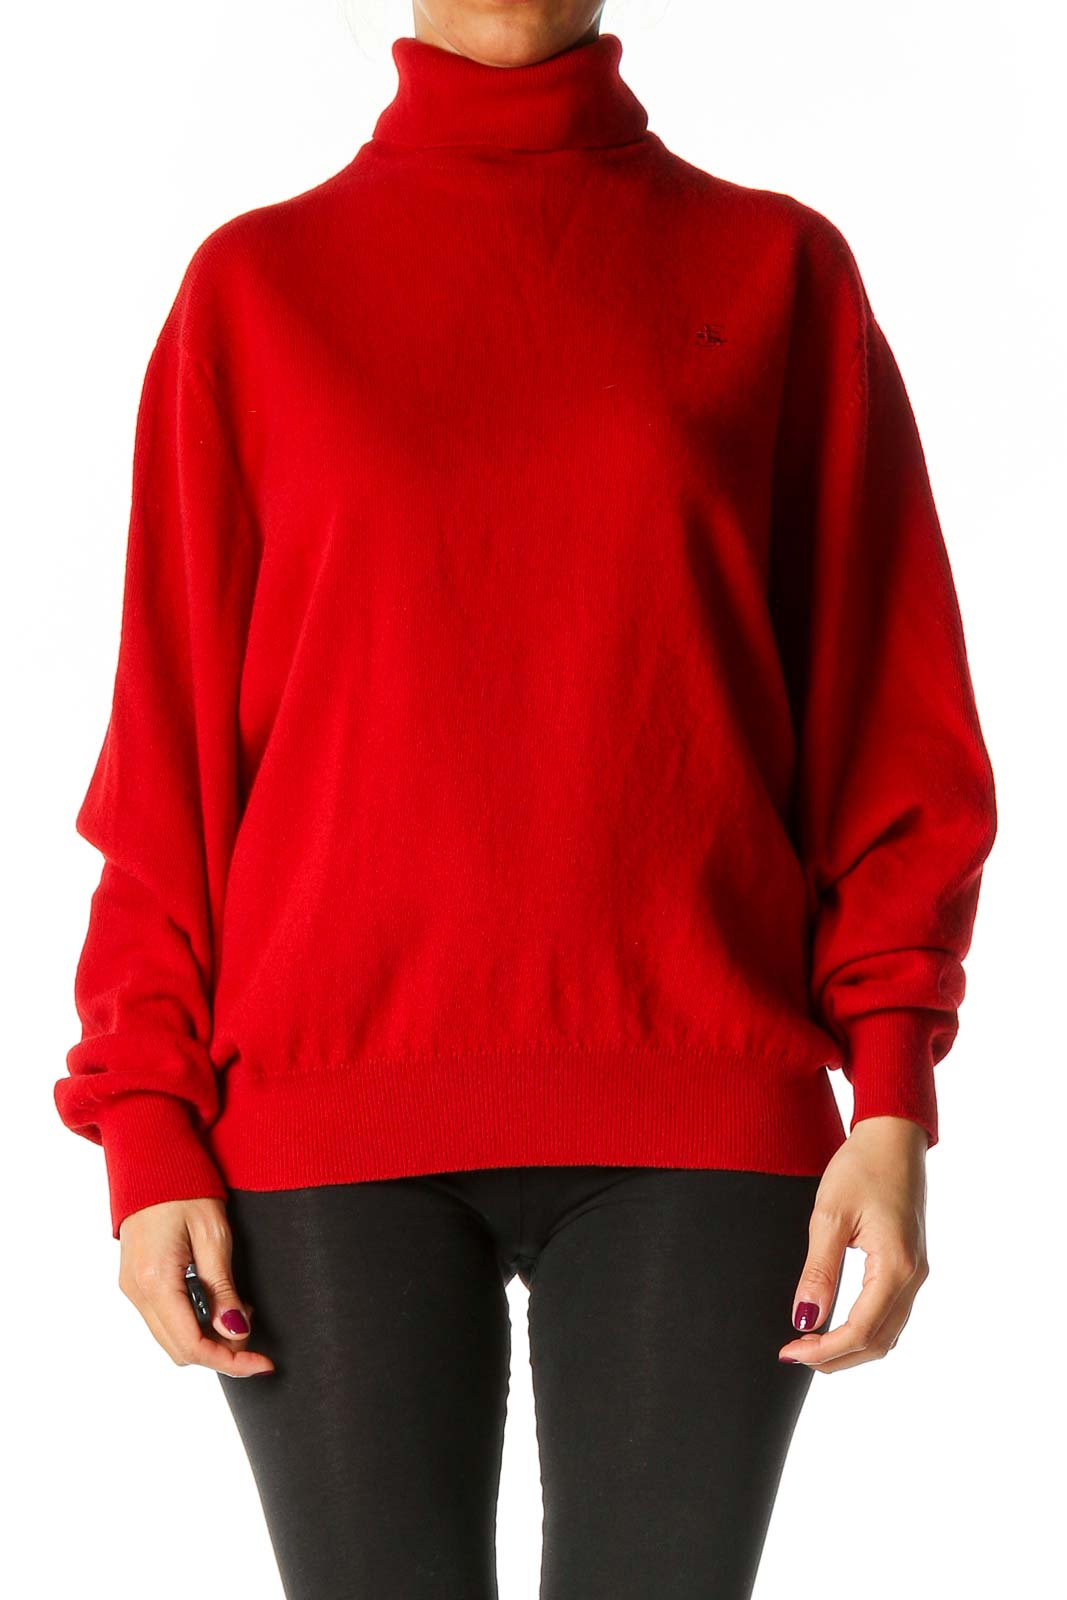 Red Solid Retro Sweater Front